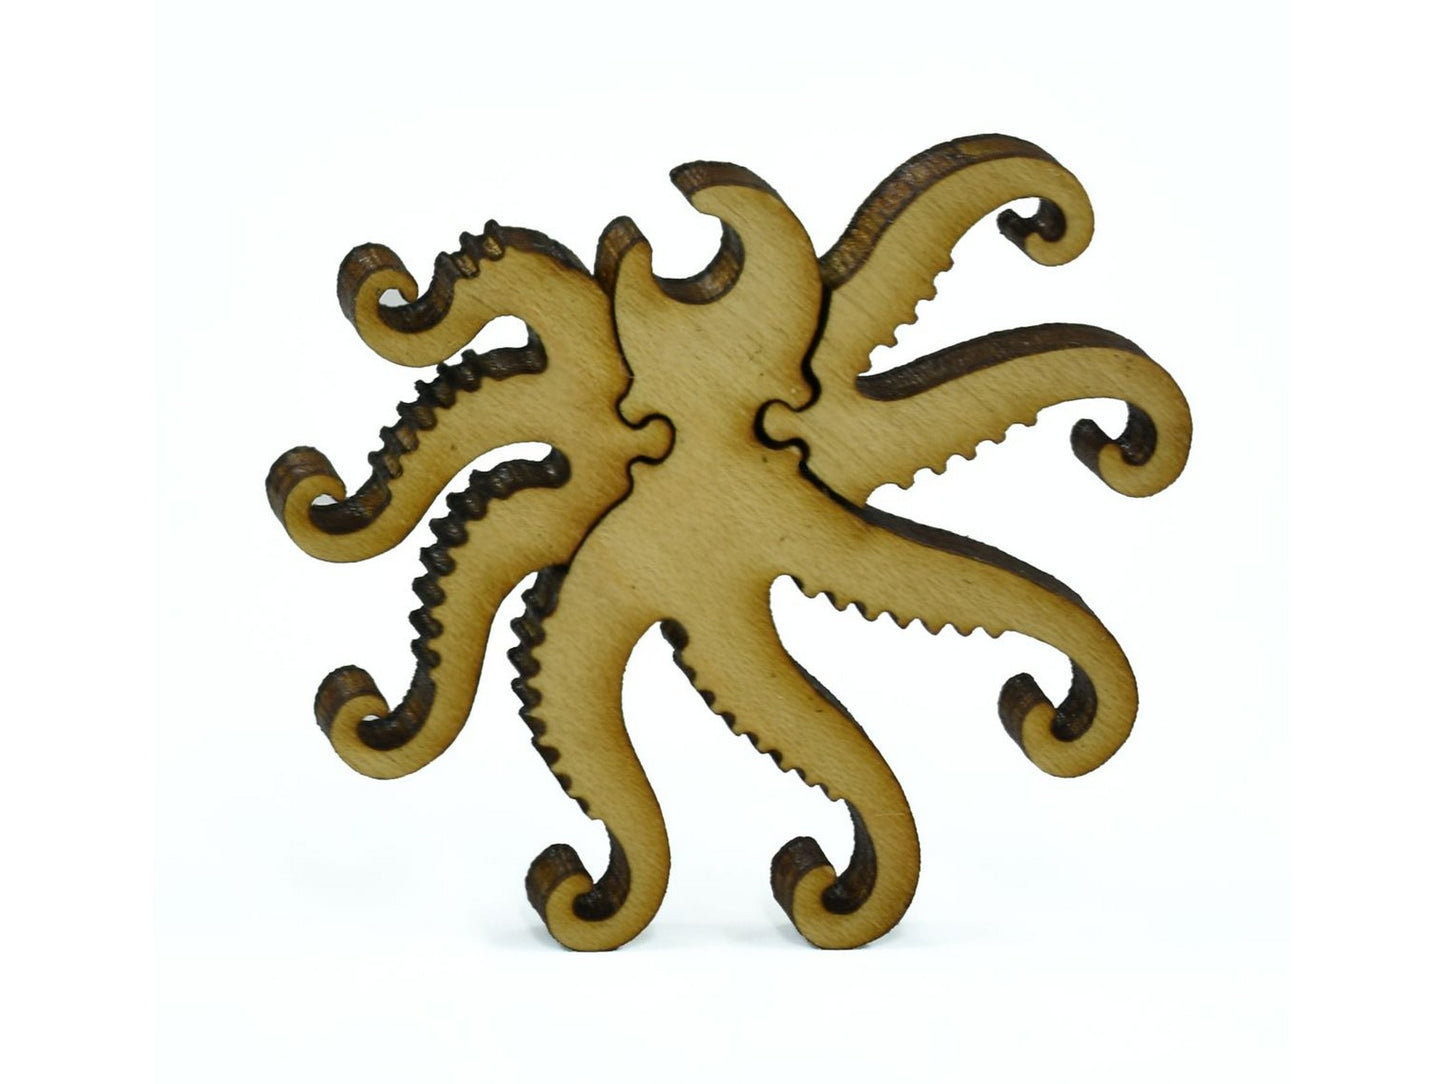 A closeup of pieces in the shape of an octopus.